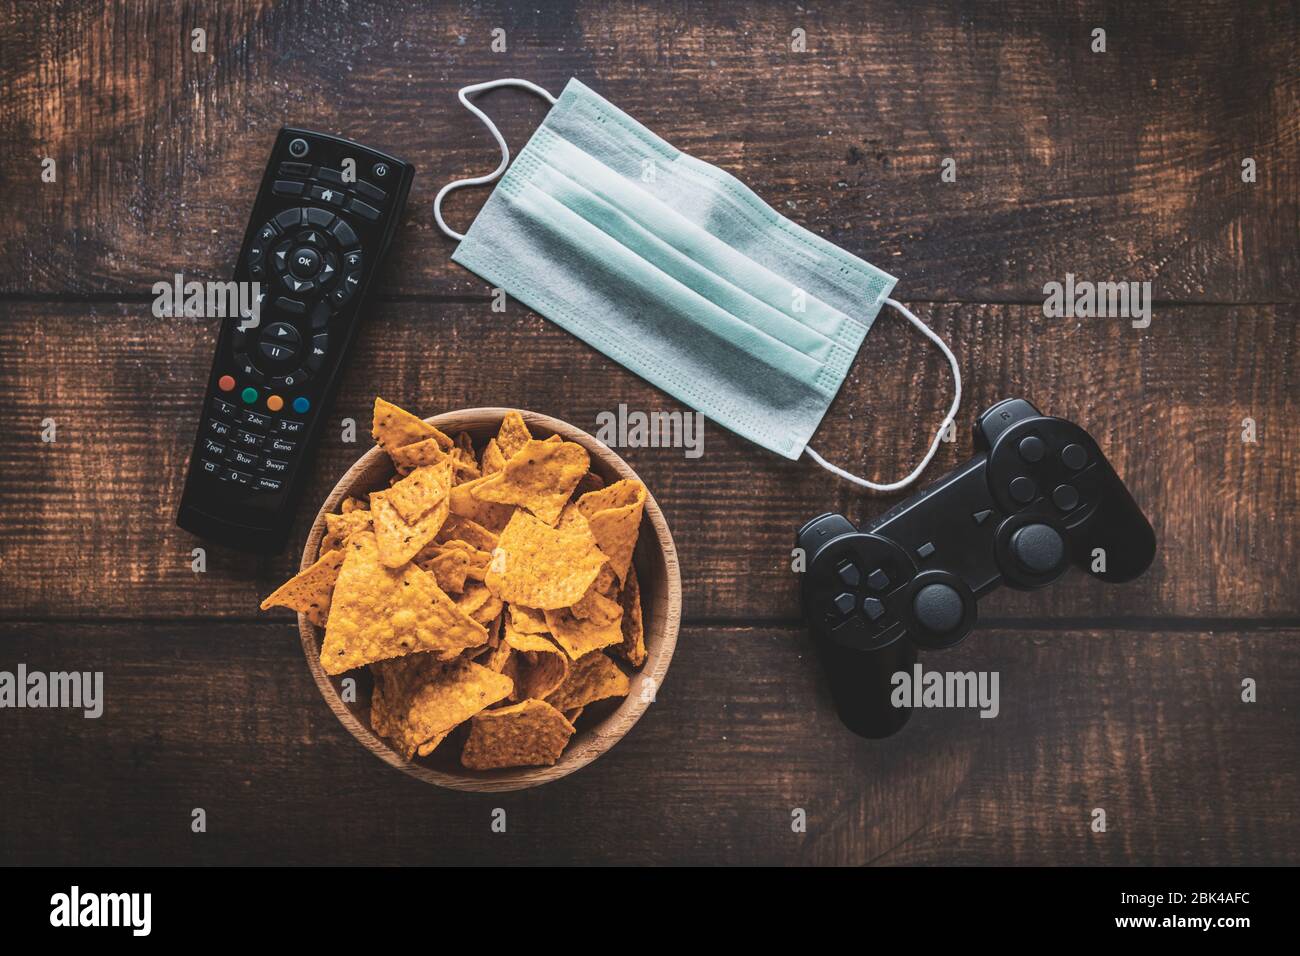 Remote control, game console rc, bowl of crisps and medical mask on wooden table. Coronavirus Covid-19 quarantine stay at home concept. Stock Photo